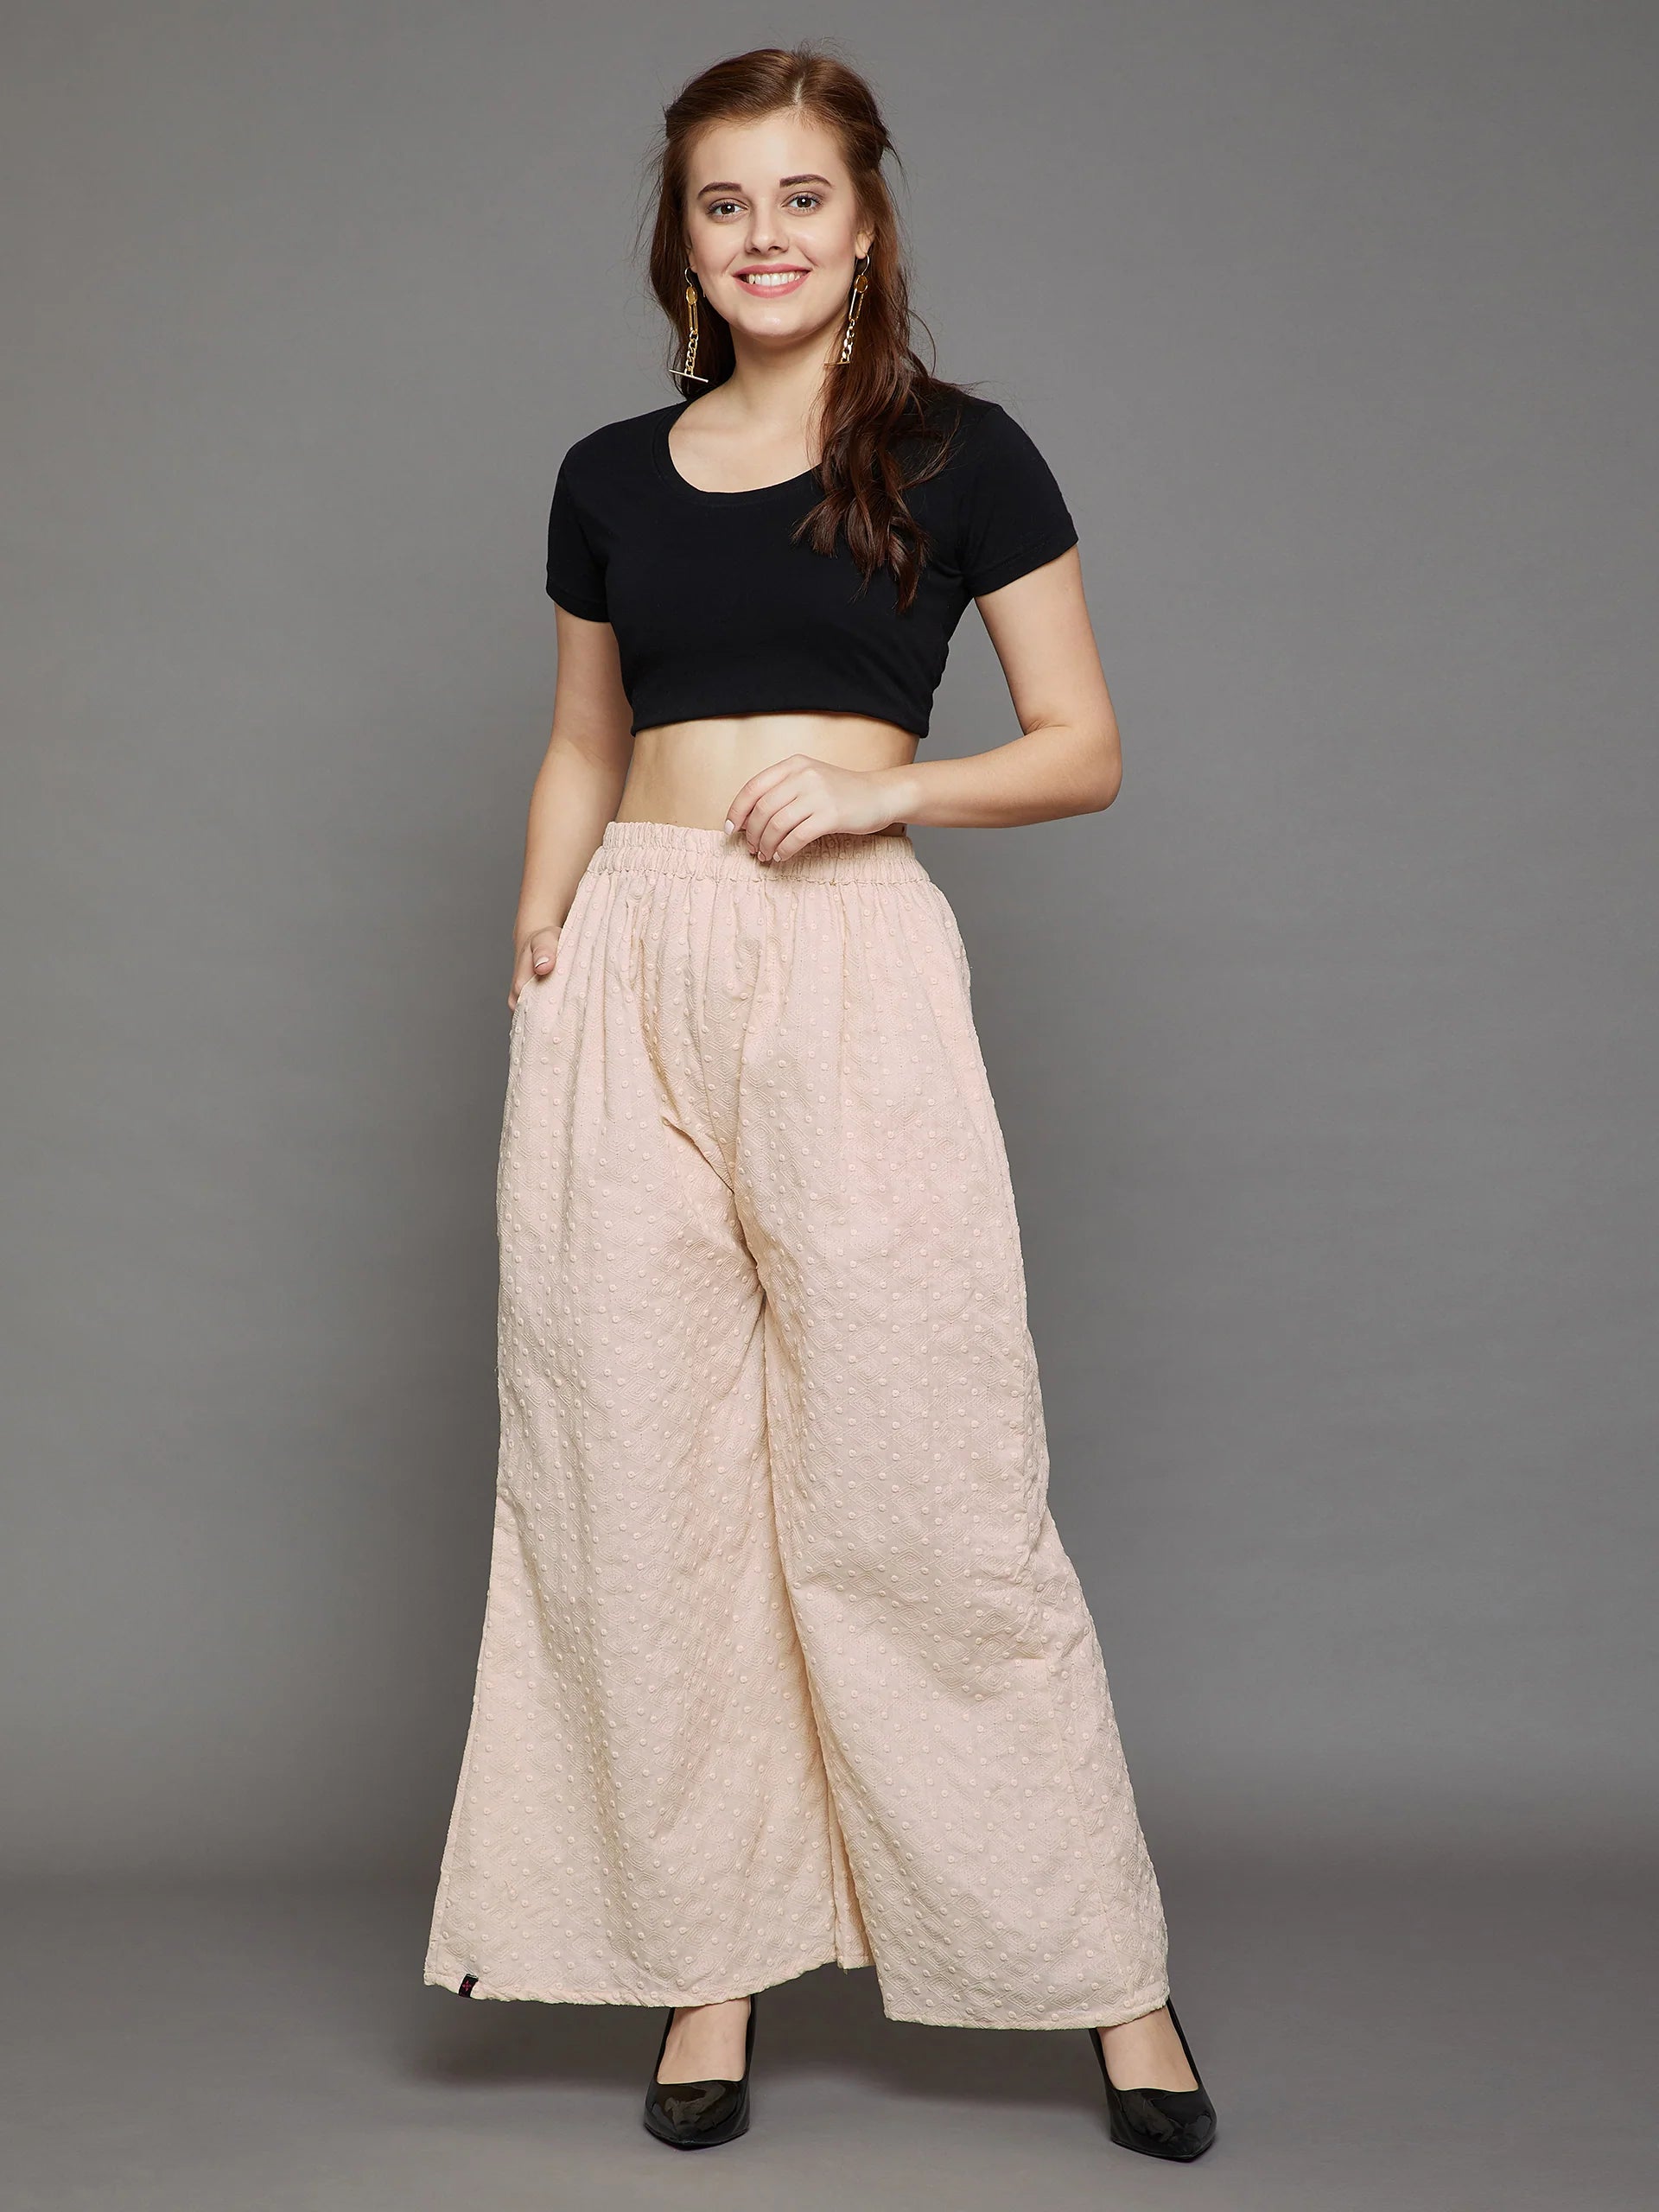 Palazzo Pants for Plus Size–24 Palazzo Outfit Ideas for Curvy Girls | Plus  size fashion, Plus size fashionista, Curvy girl fashion